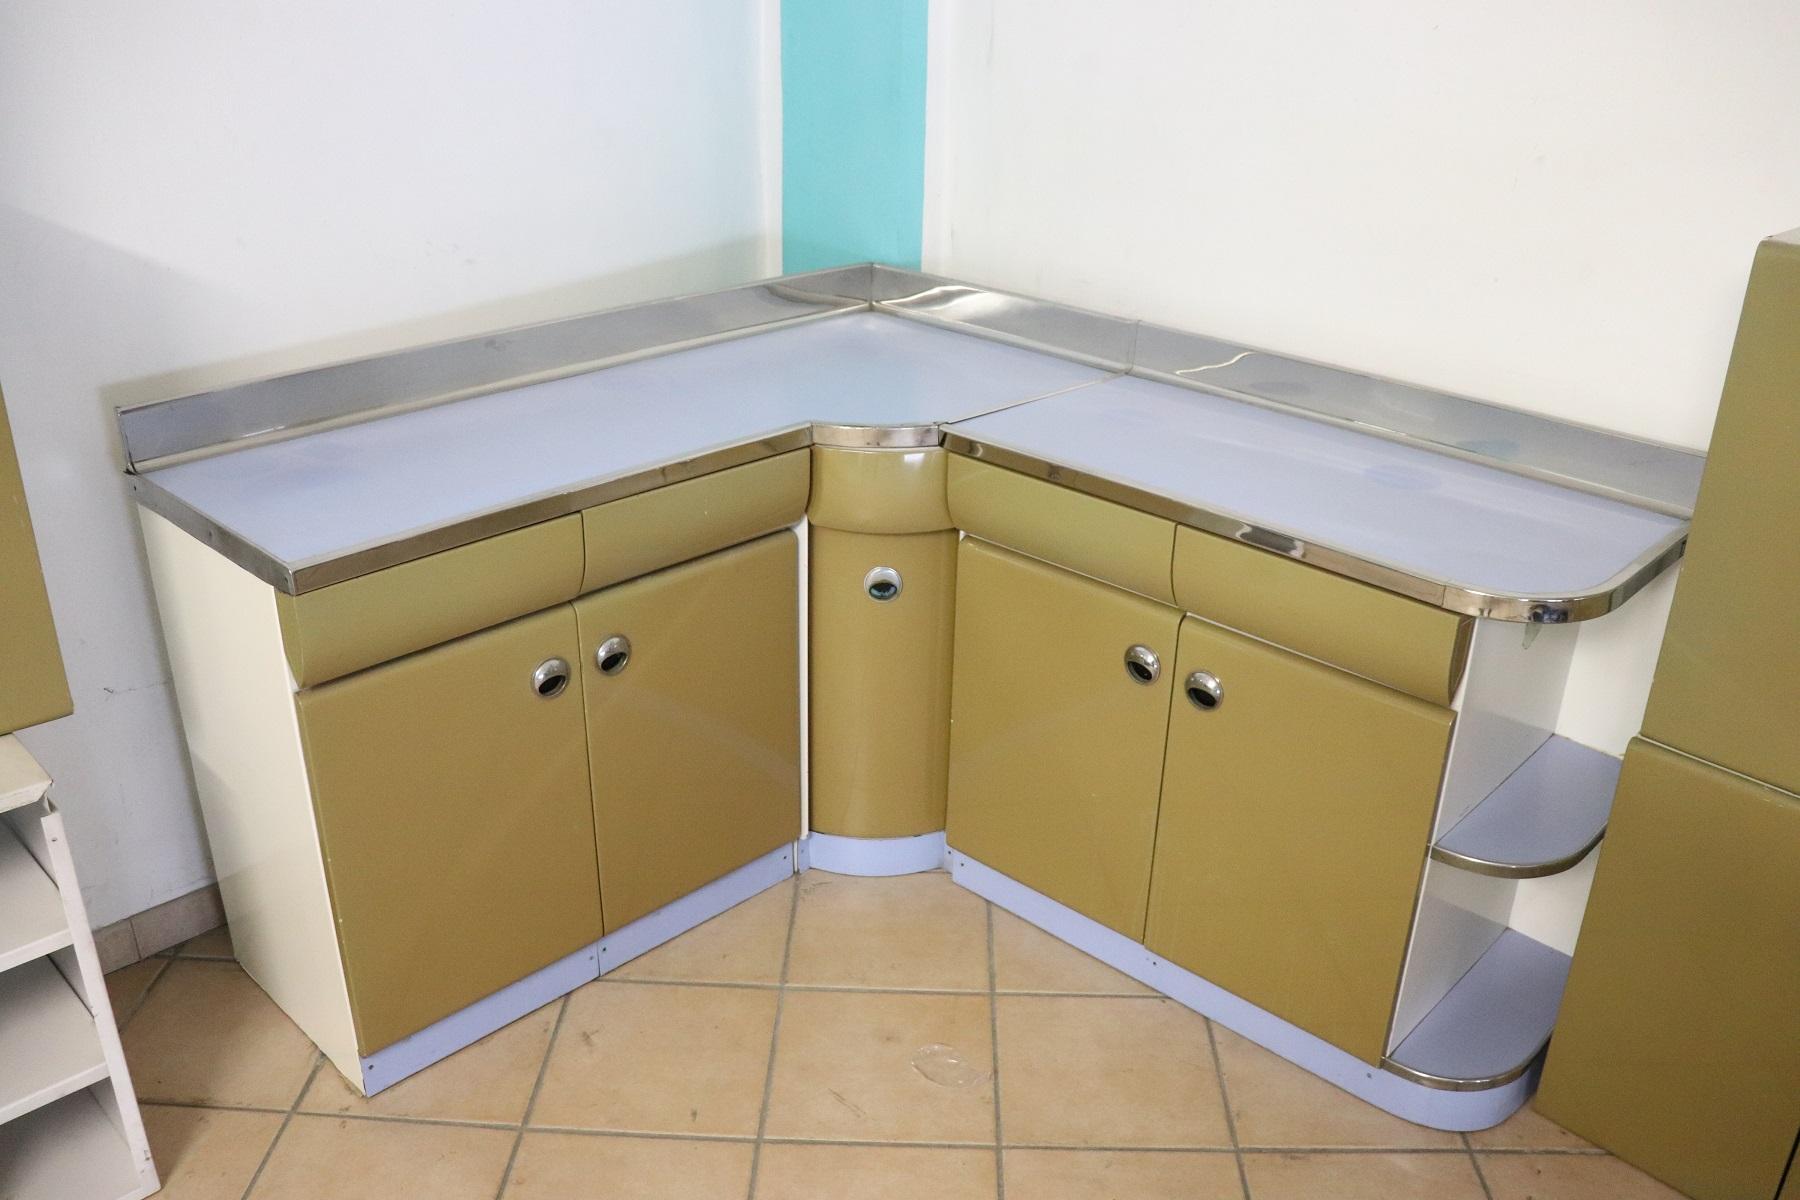 Rare 1950s Italian design modular kitchen. The kitchen consists of twelve pieces:
Three bases below
a table
two floors to fit over the bases
six wall-mounted hanging furniture
The chairs, appliances and sink are missing
This kitchen is